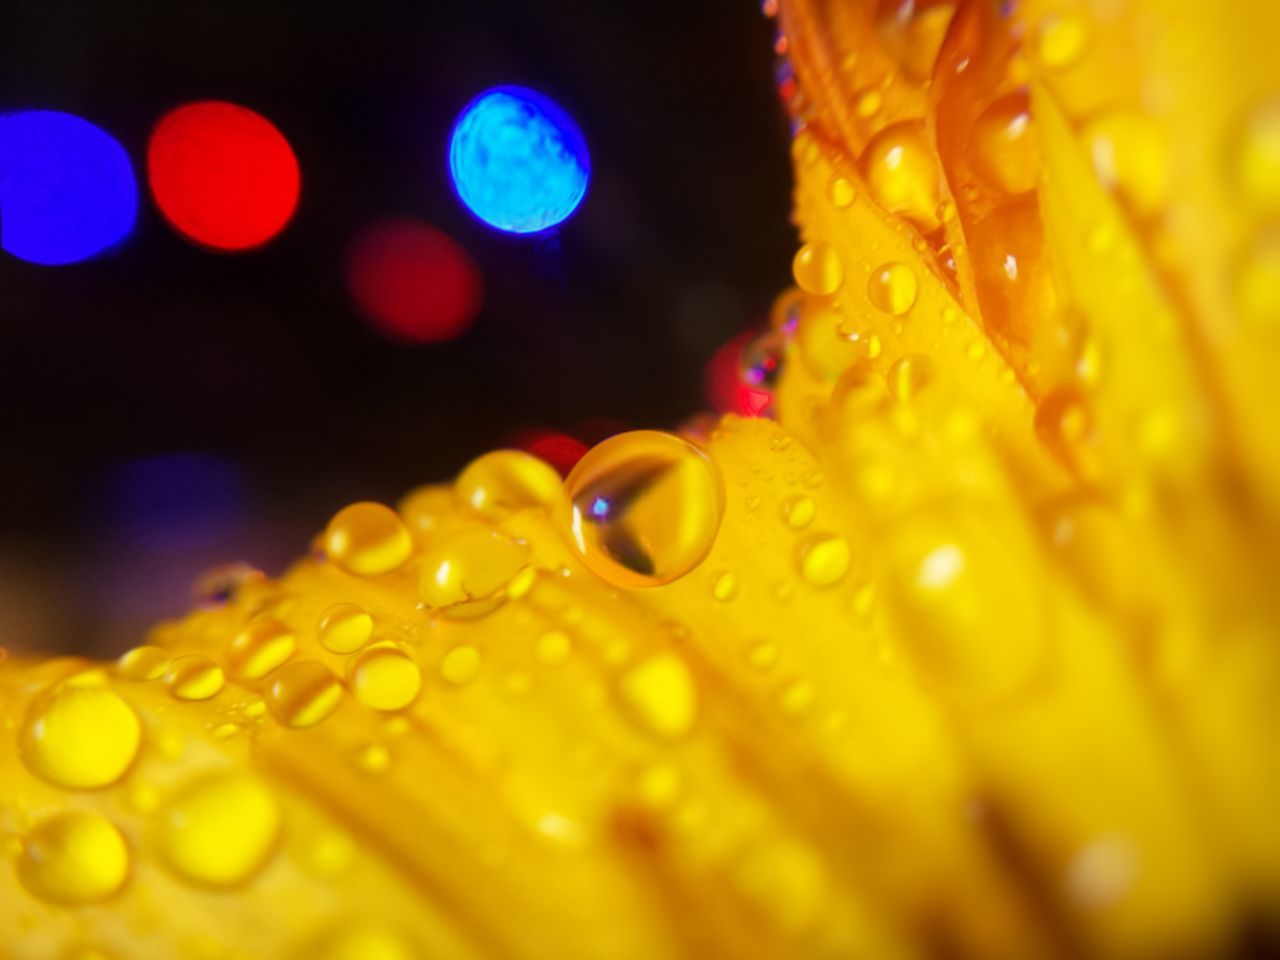 CLOSE-UP OF WET YELLOW FLOWER IN RAIN